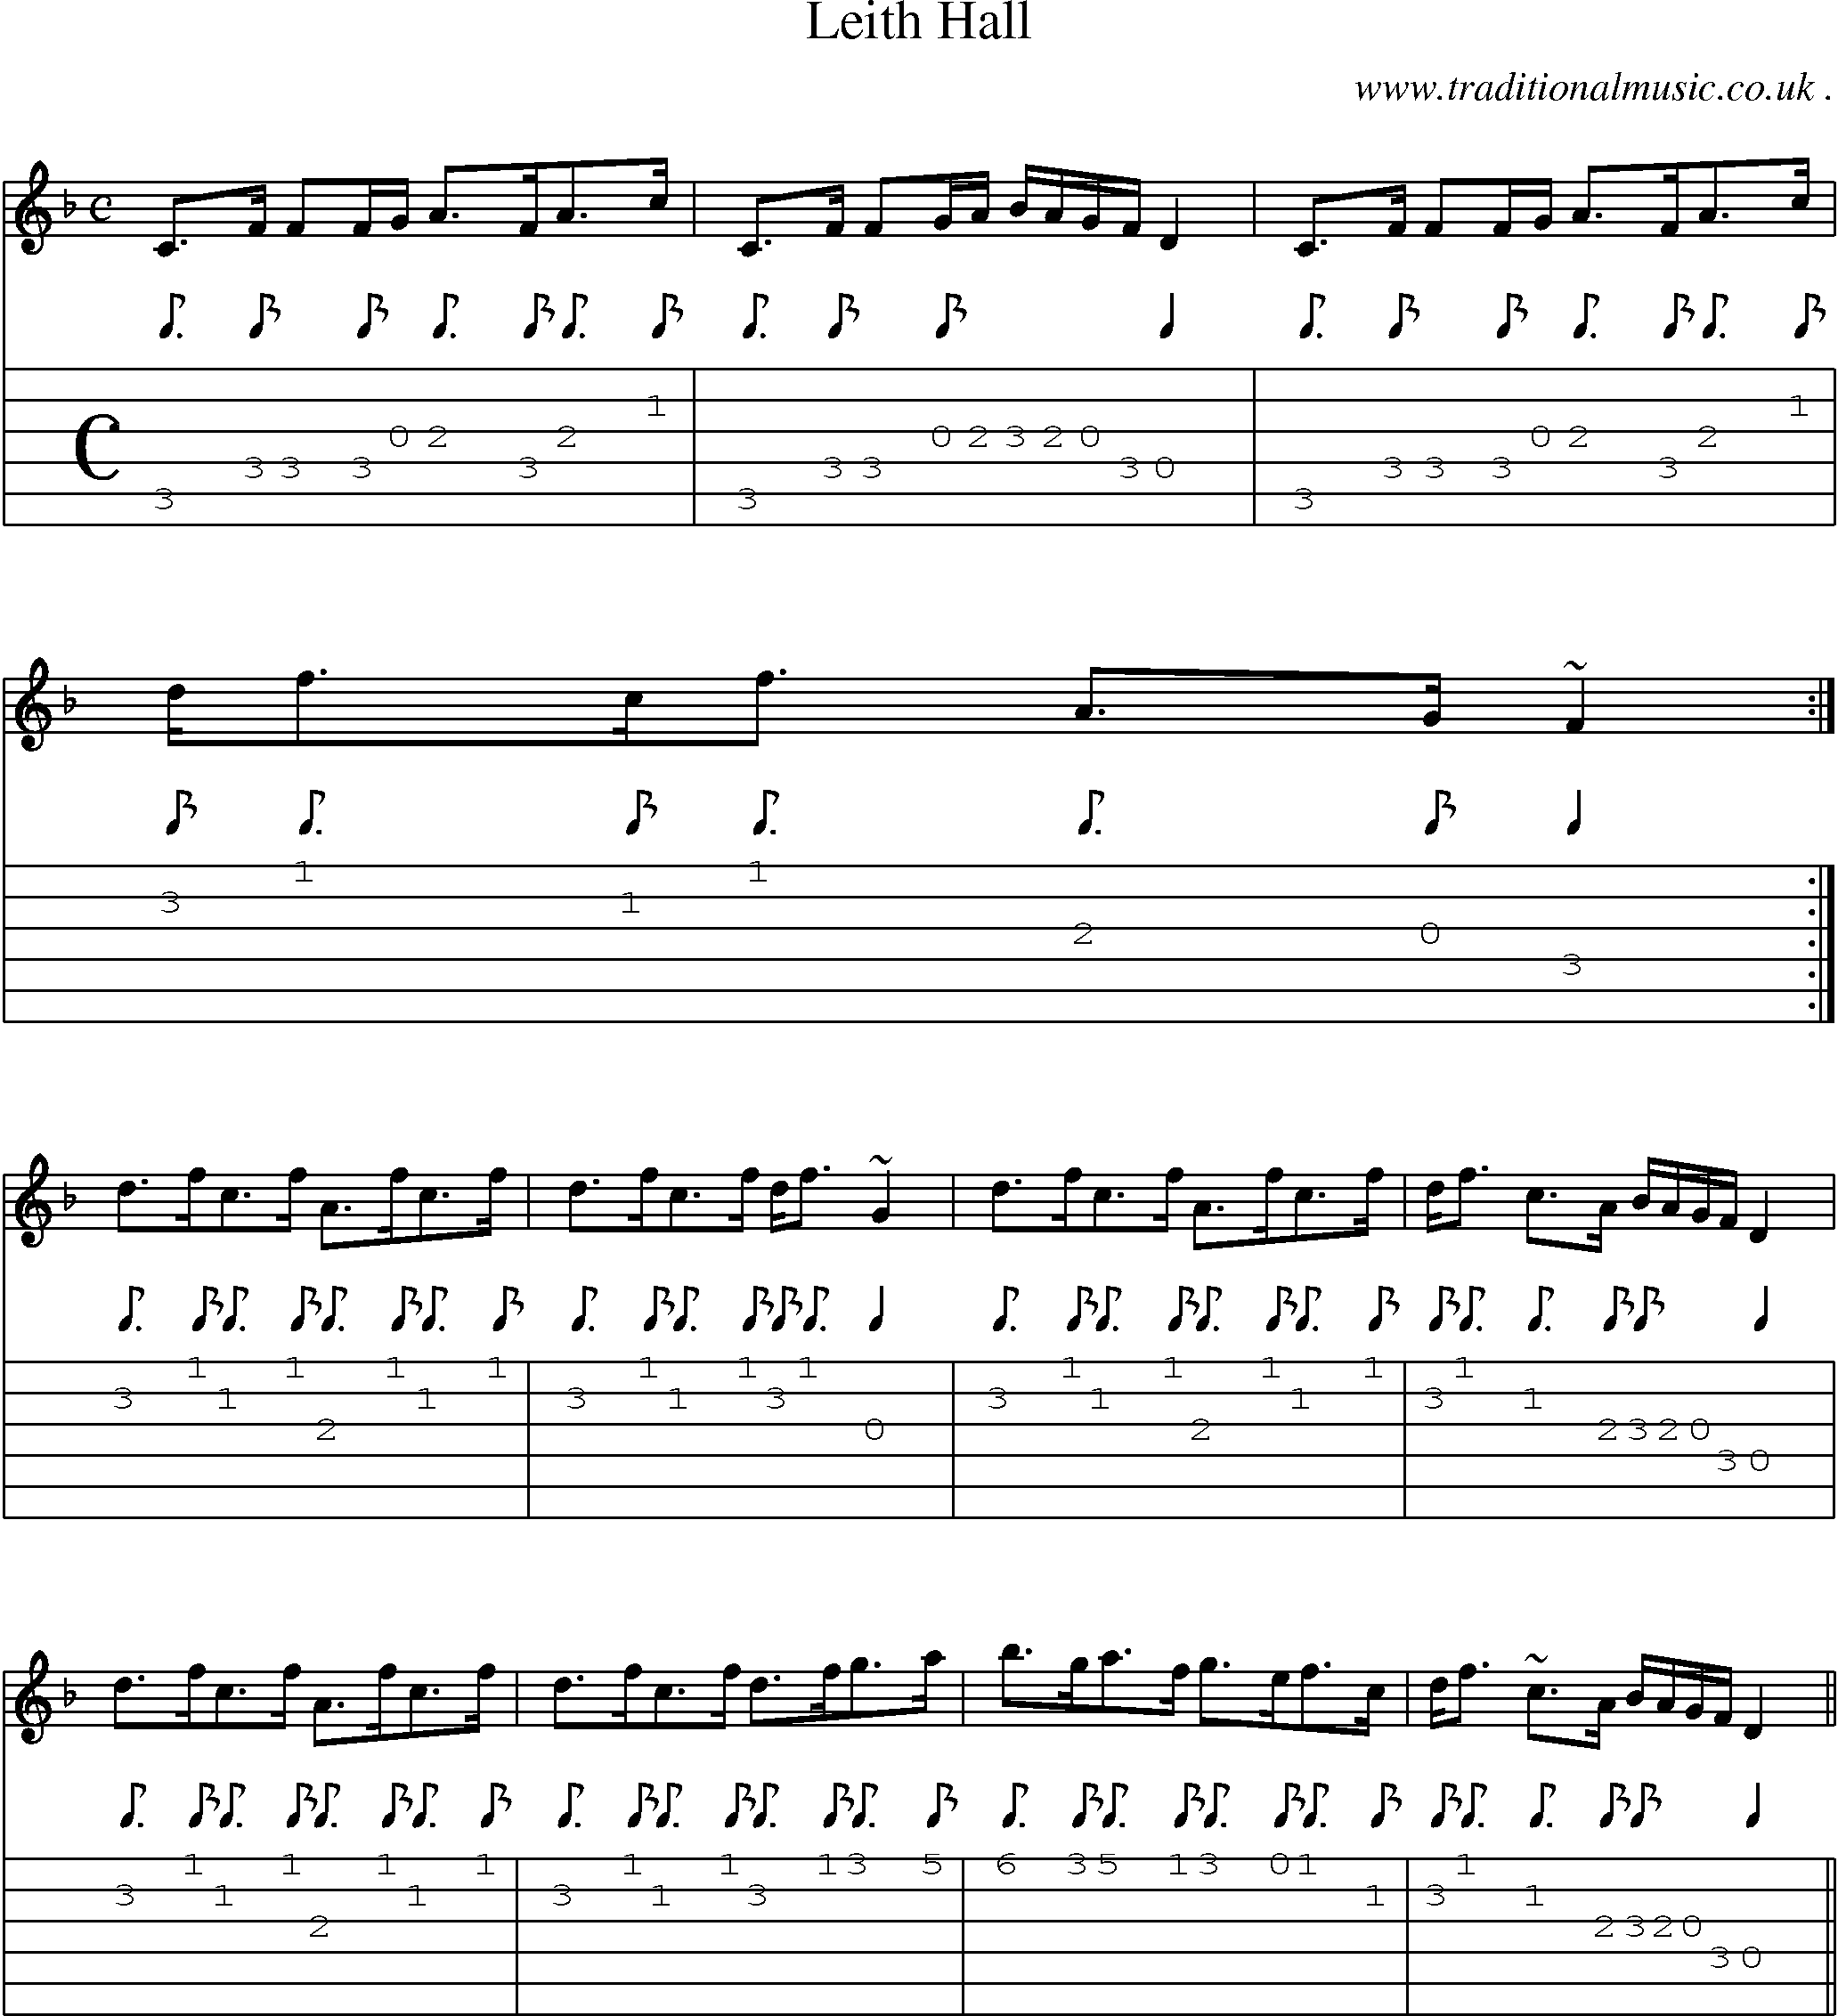 Sheet-music  score, Chords and Guitar Tabs for Leith Hall